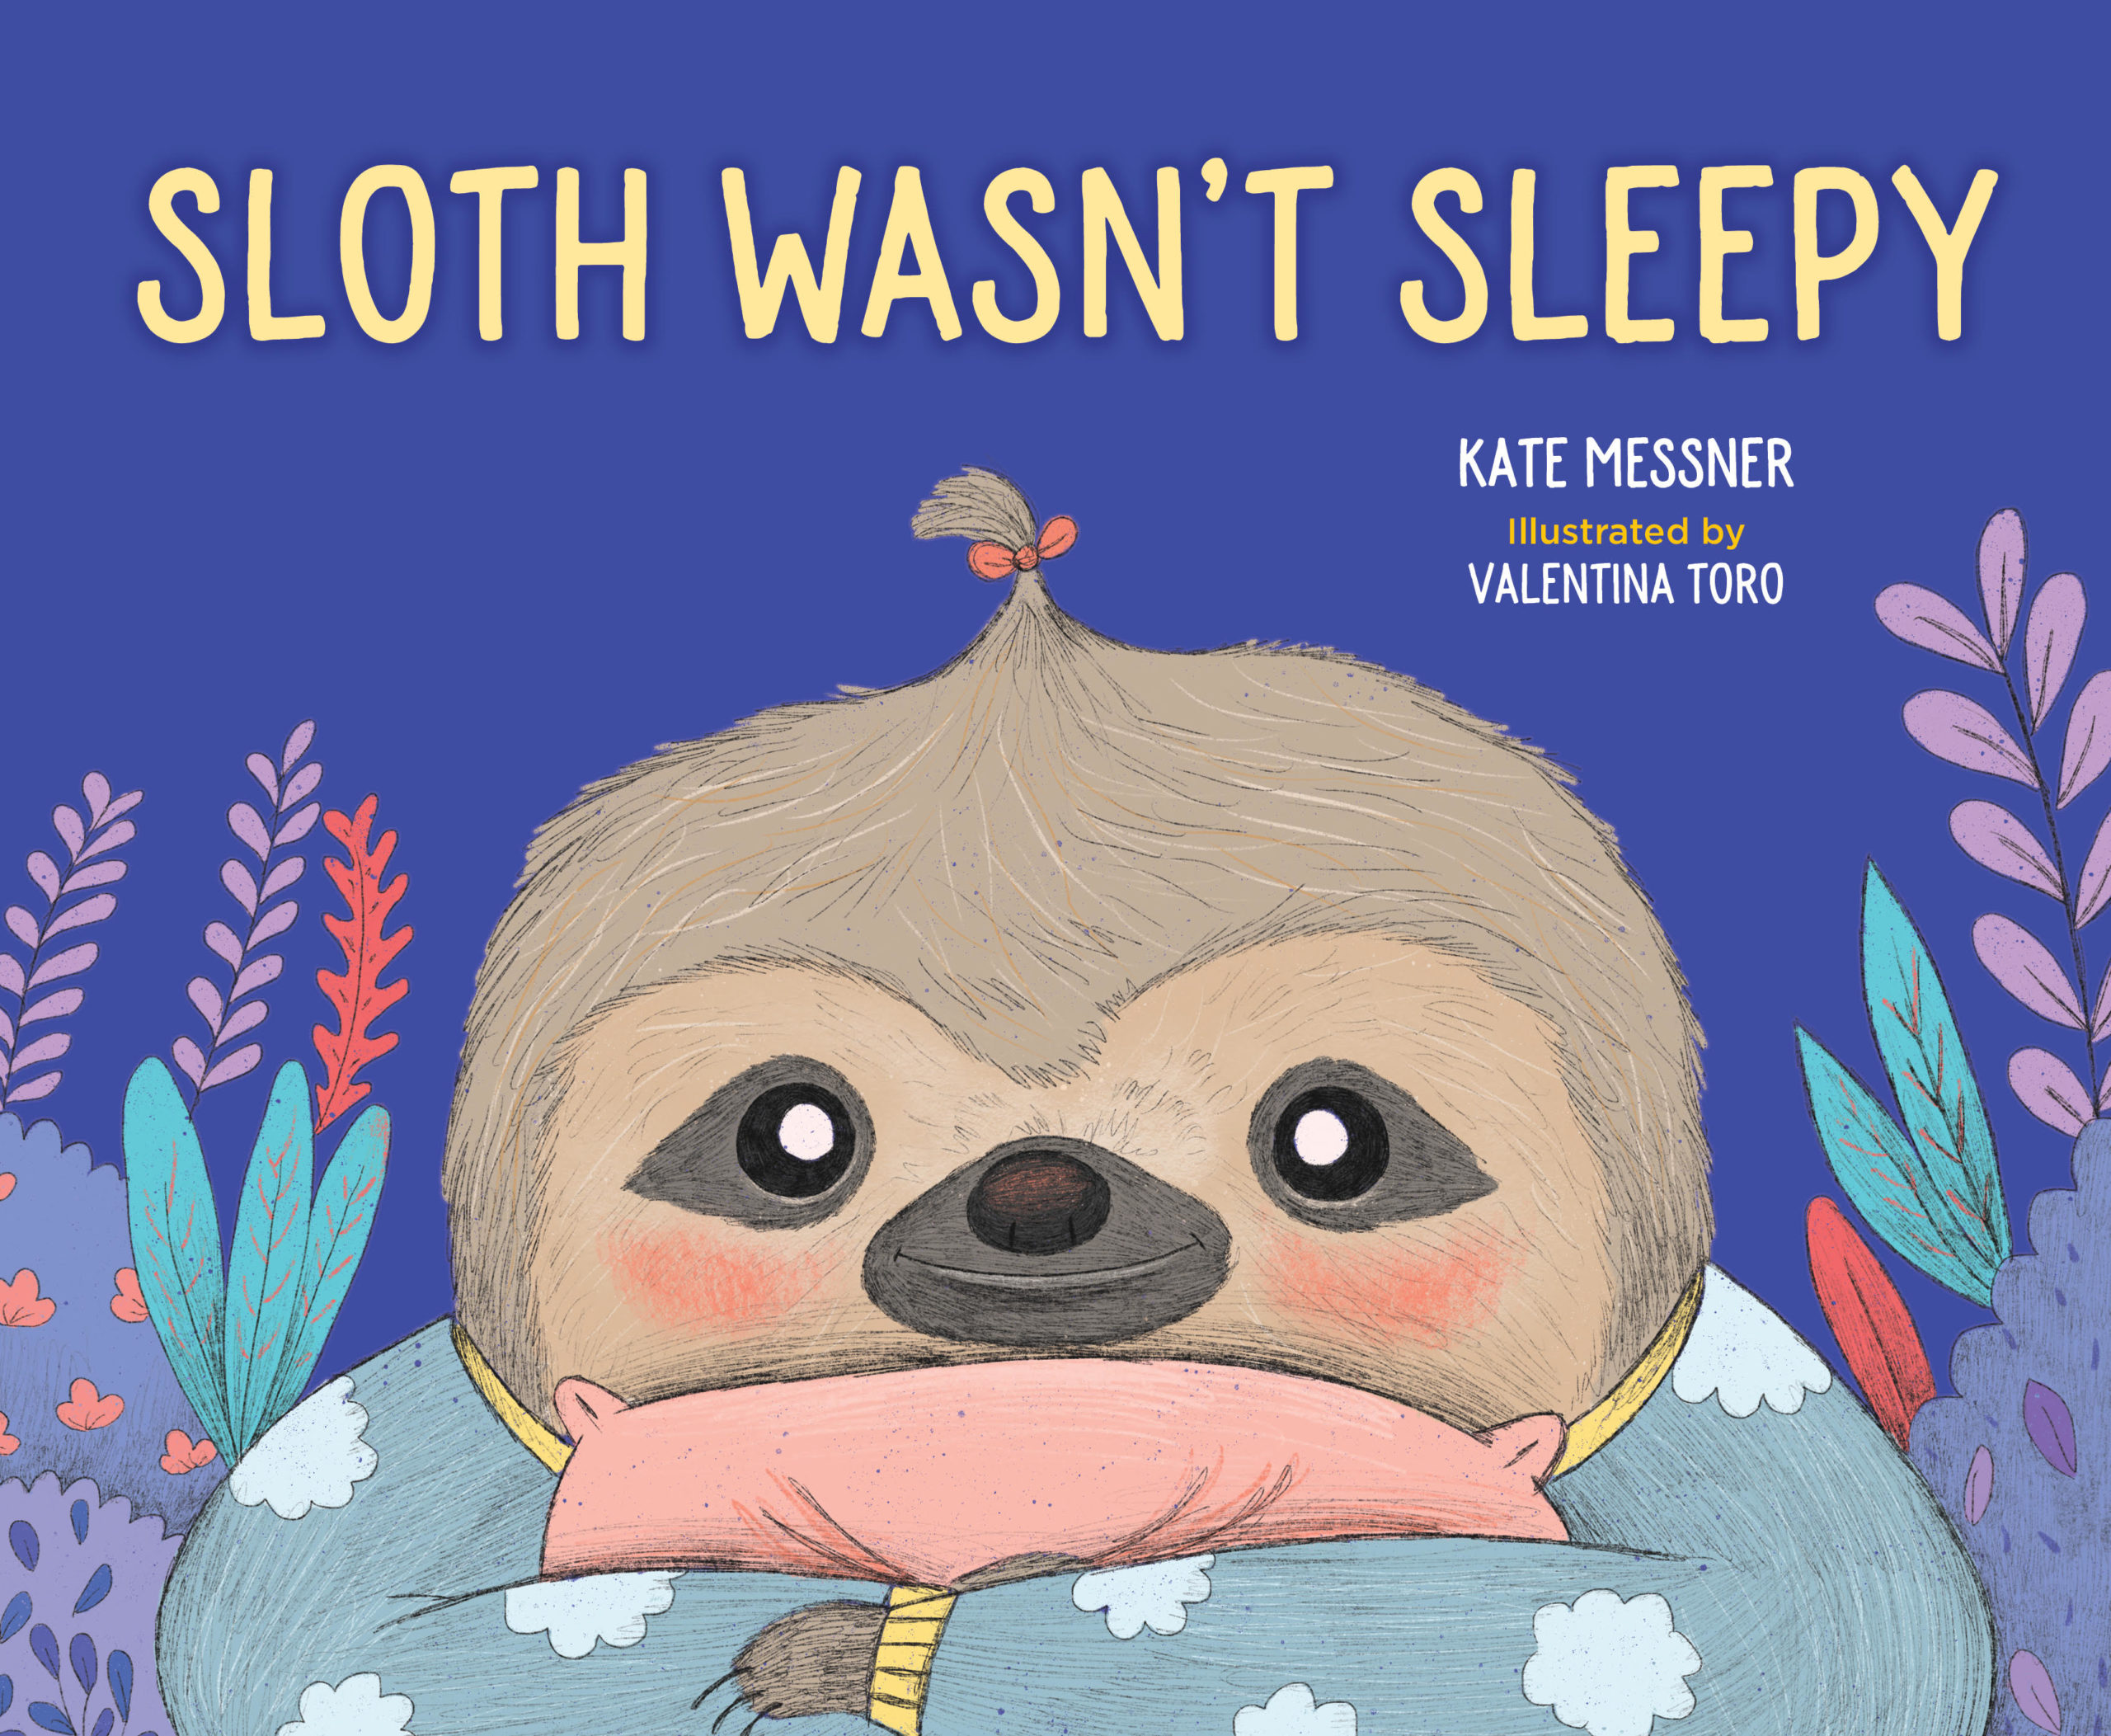 Sloth Wasn’t Sleepy by Kate Messner, Illustrated by Valentina Toro